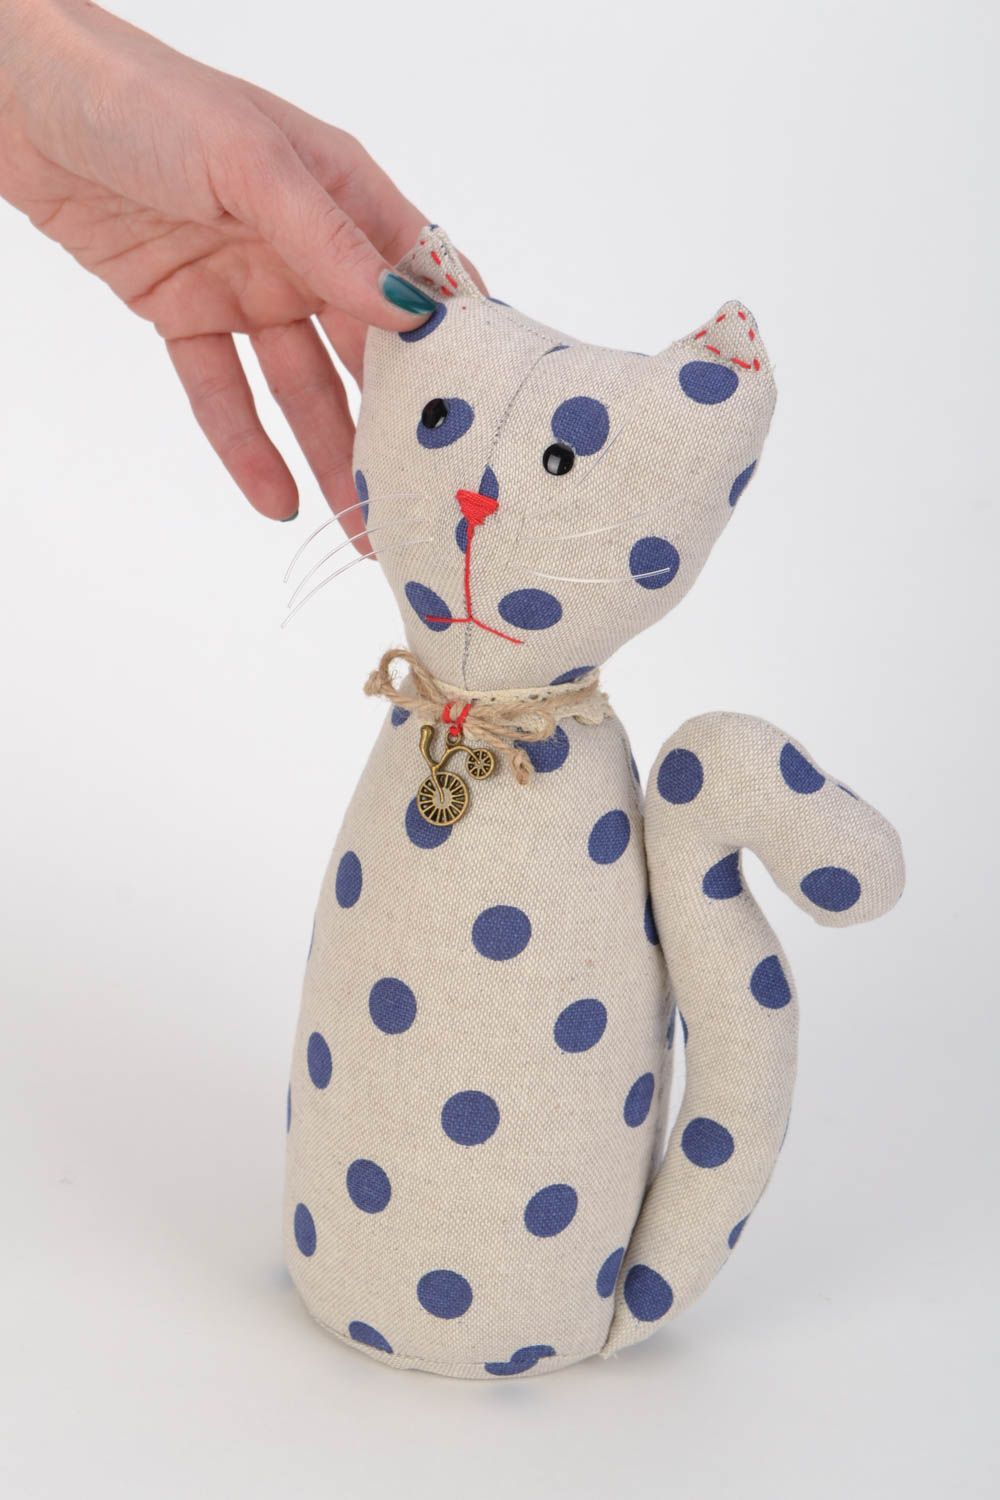 Handmade soft toy sewn of light blue polka dot fabric in the shape of cat photo 2